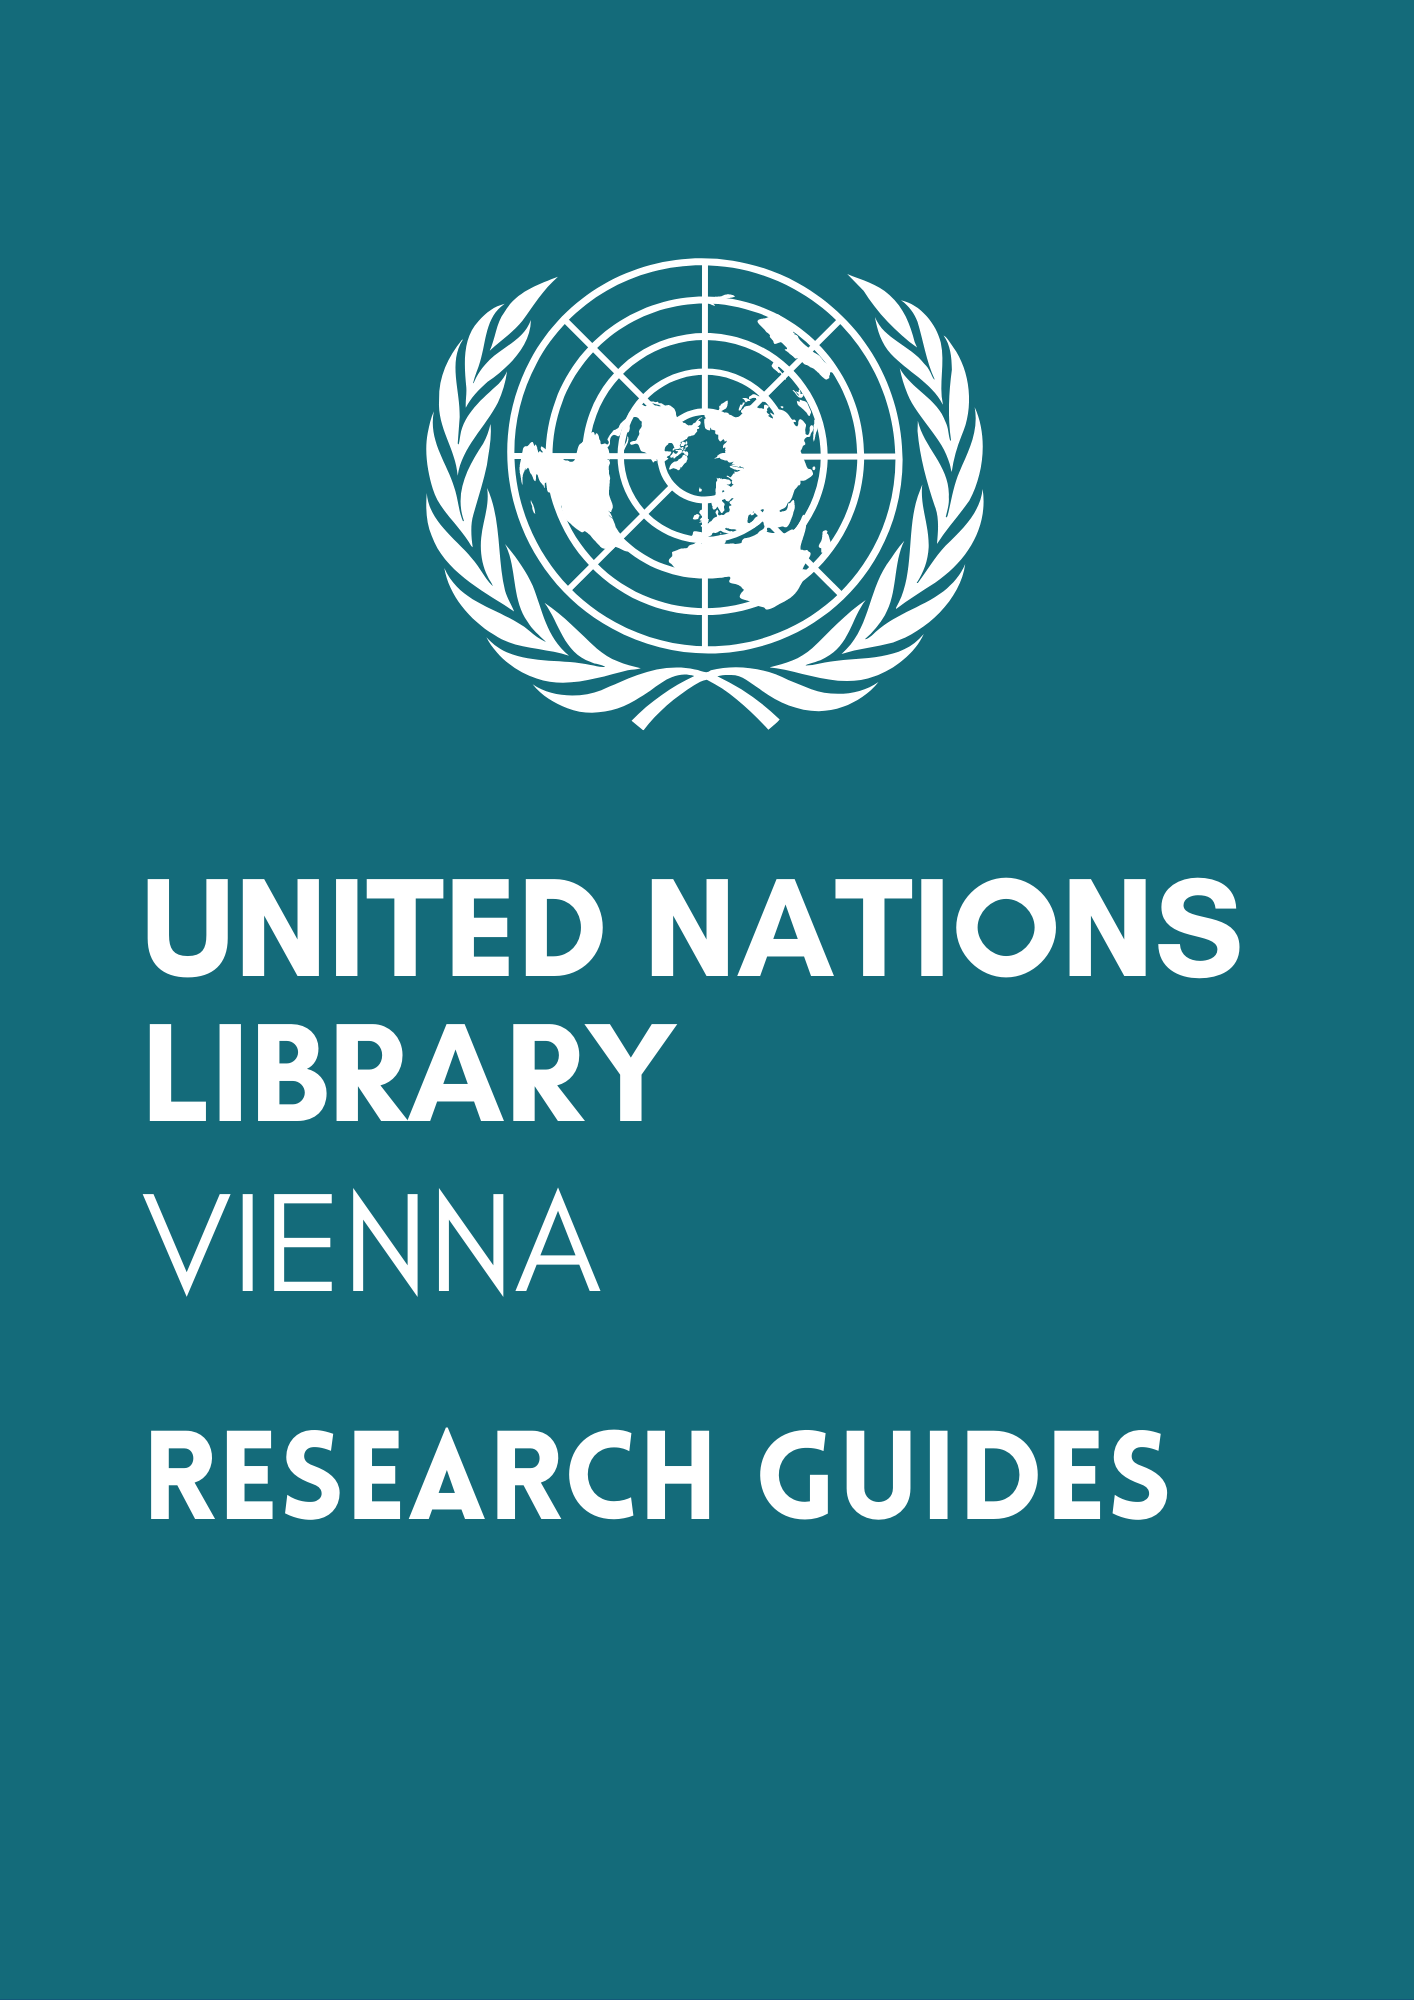 <div style="text-align: center;"><a href="https://libraryresearch.unvienna.org/organizedcrime">Research Guides by the United Nations Library - Vienna</a></div>